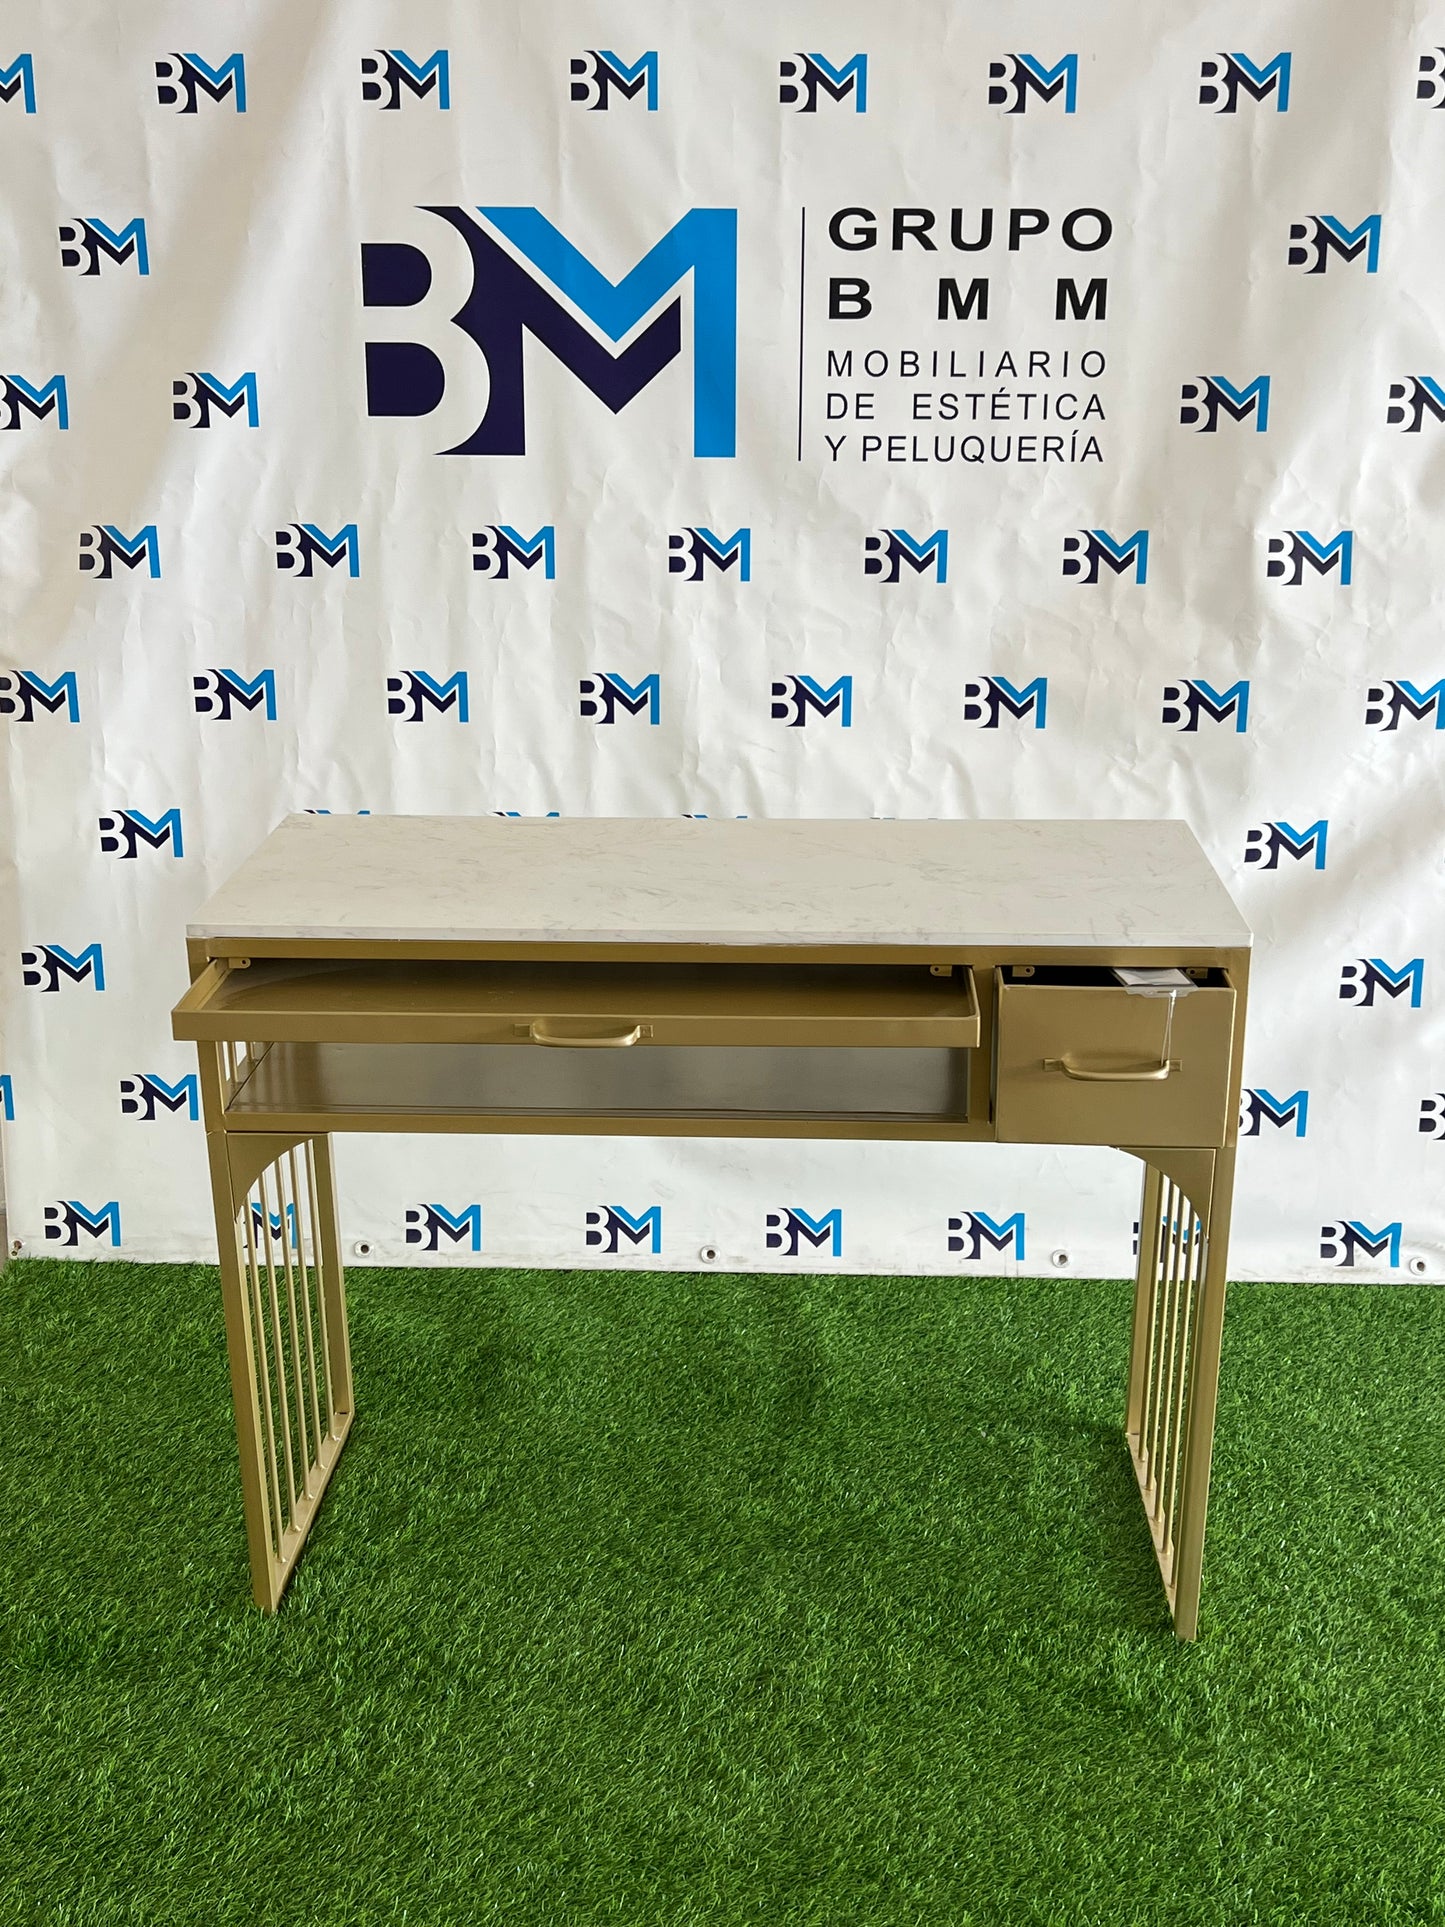 Gold metal individual manicure table with tray, drawers and marble-like stone